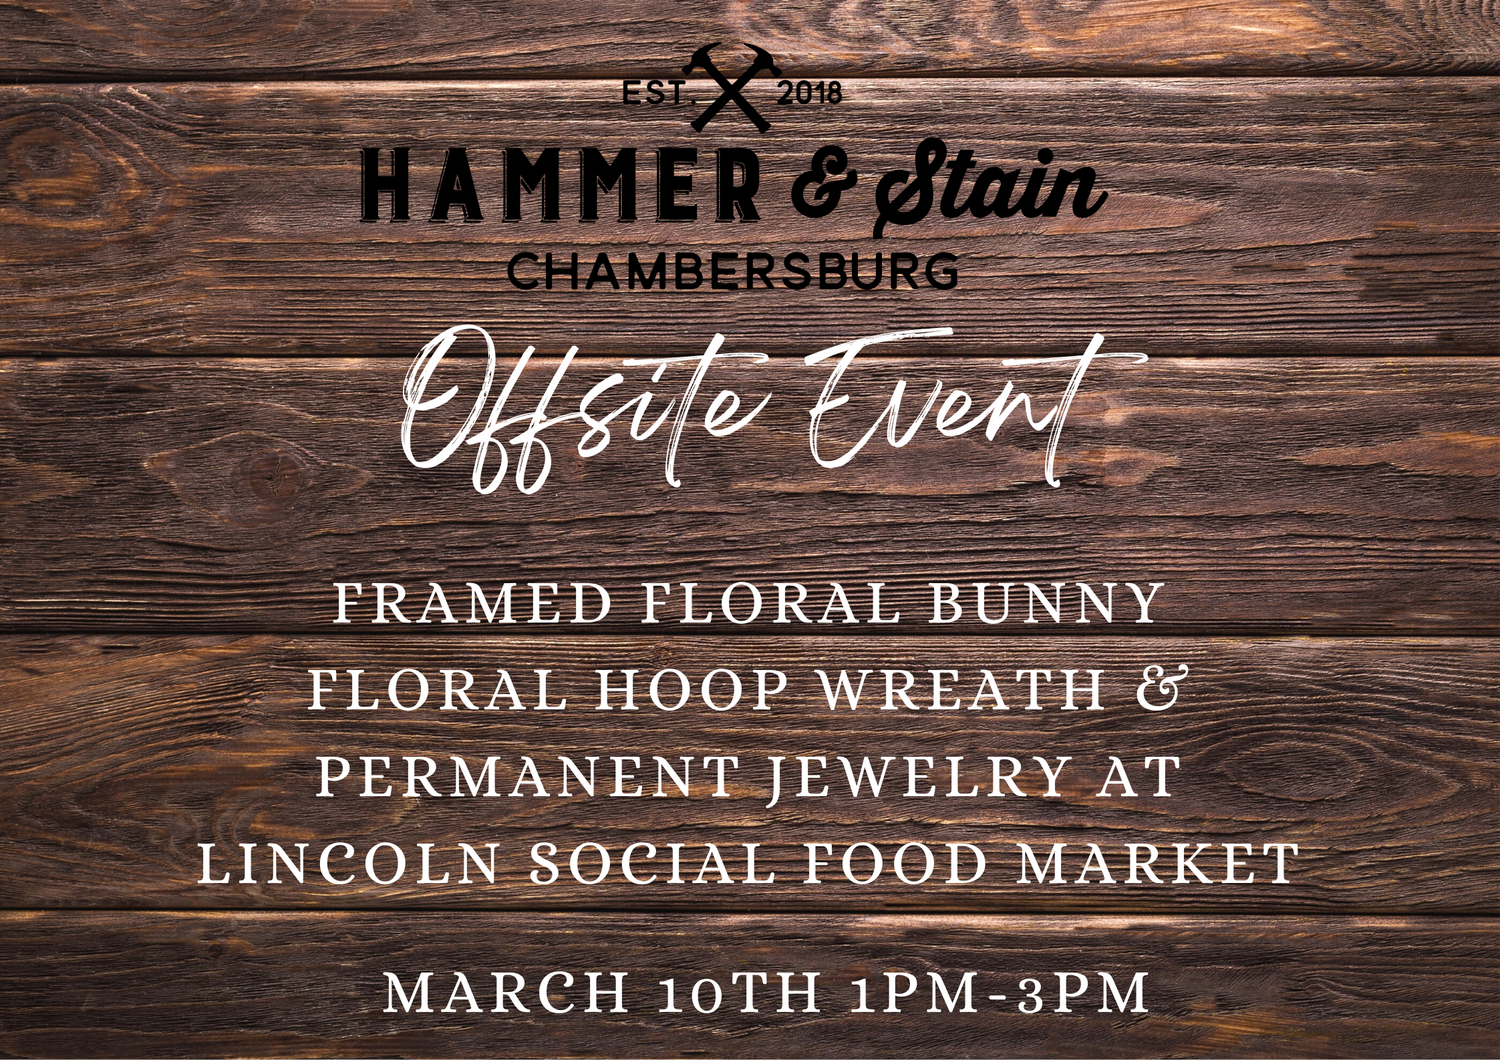 03/10/24 Framed Floral Bunny & Floral Hoop Wreath with Permanent Jewelry at Lincoln Social Food Market 1p-3p